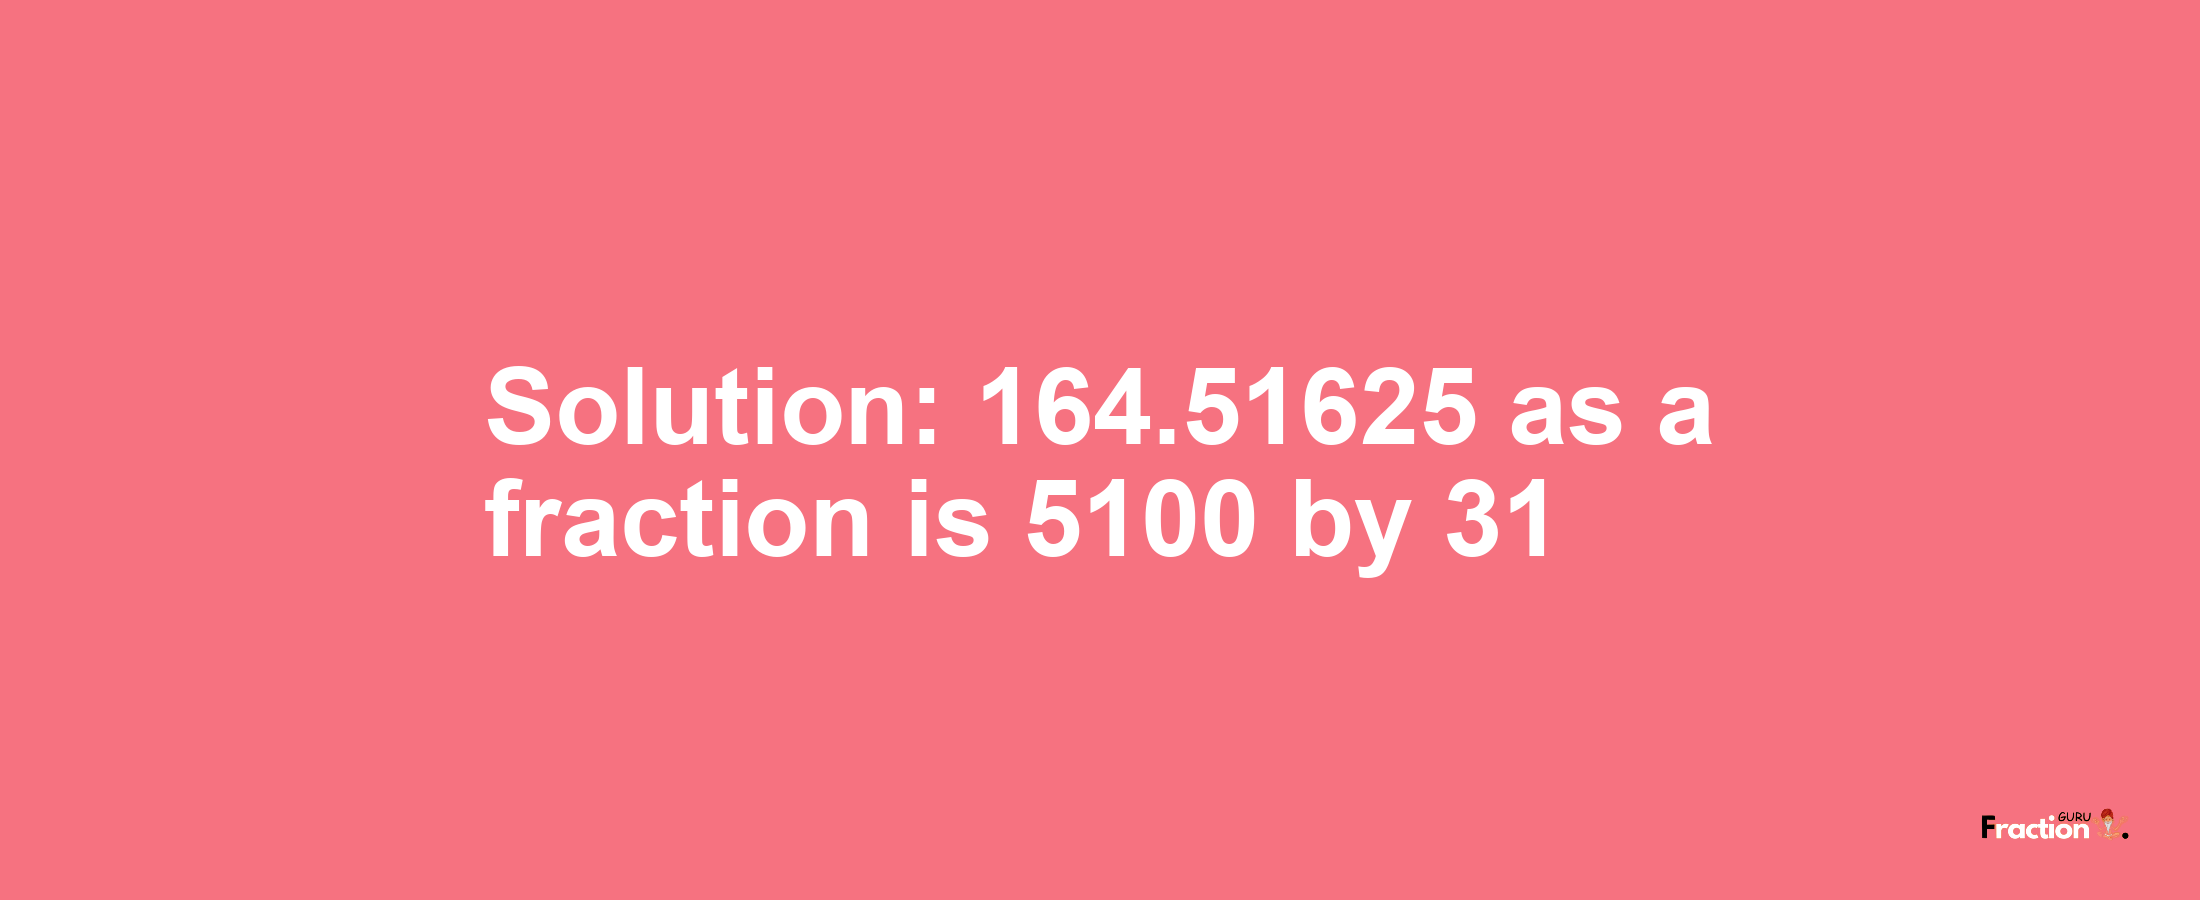 Solution:164.51625 as a fraction is 5100/31